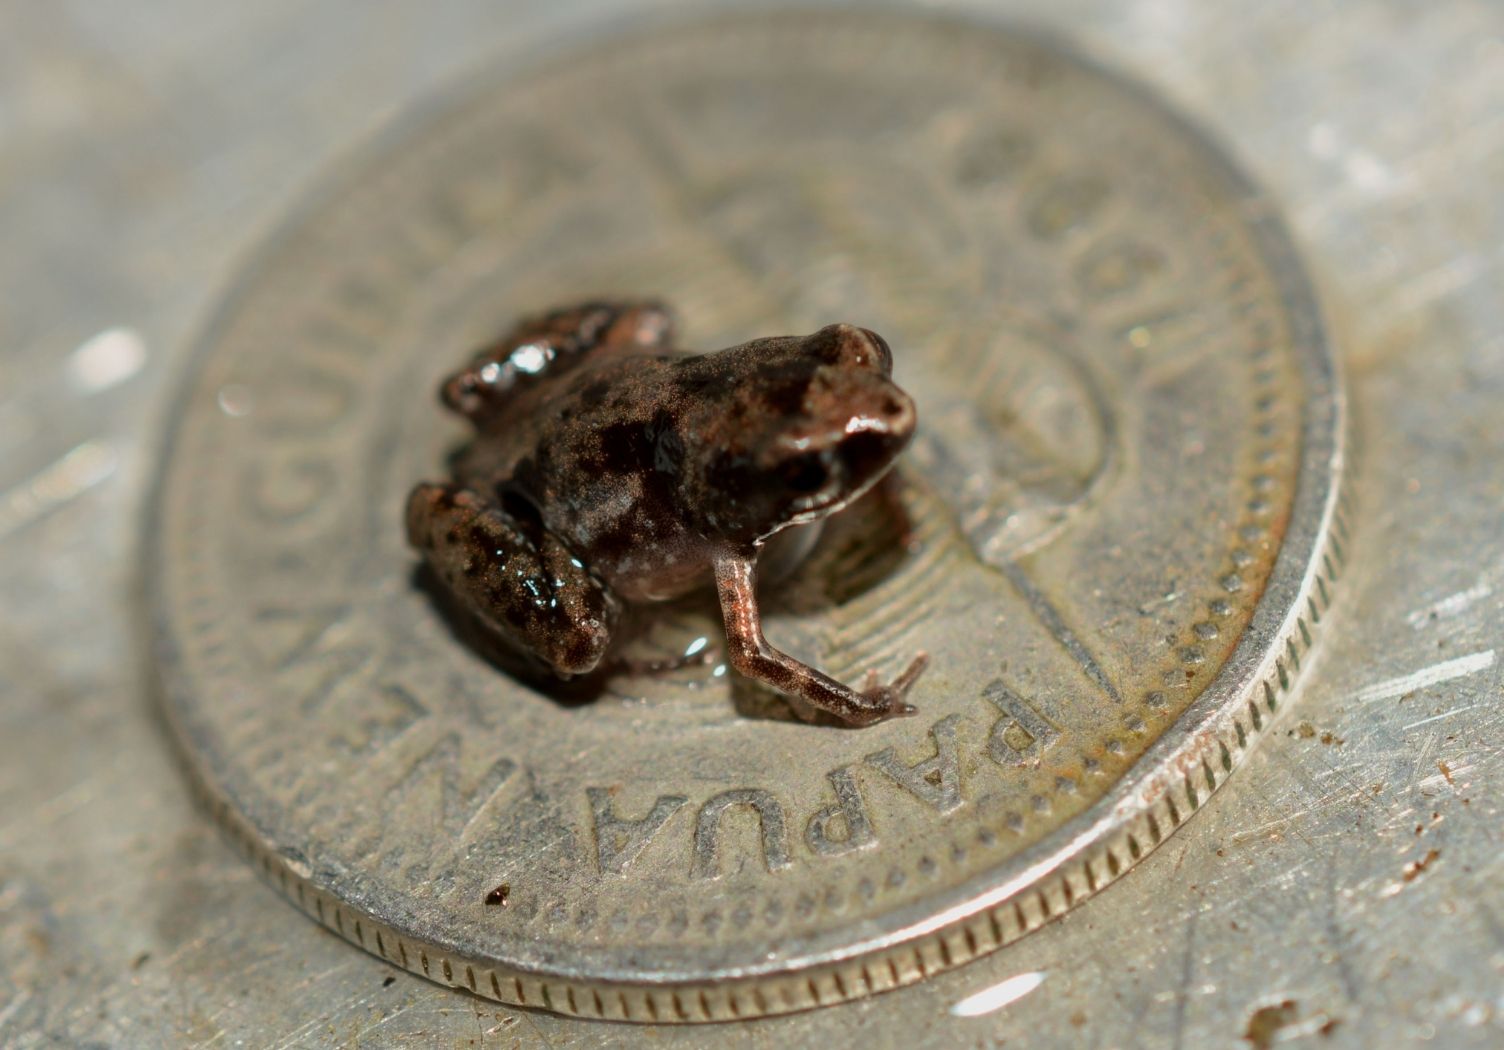 A tiny brown frog sitting on the centre of a small coin to show it's minute size to scale.